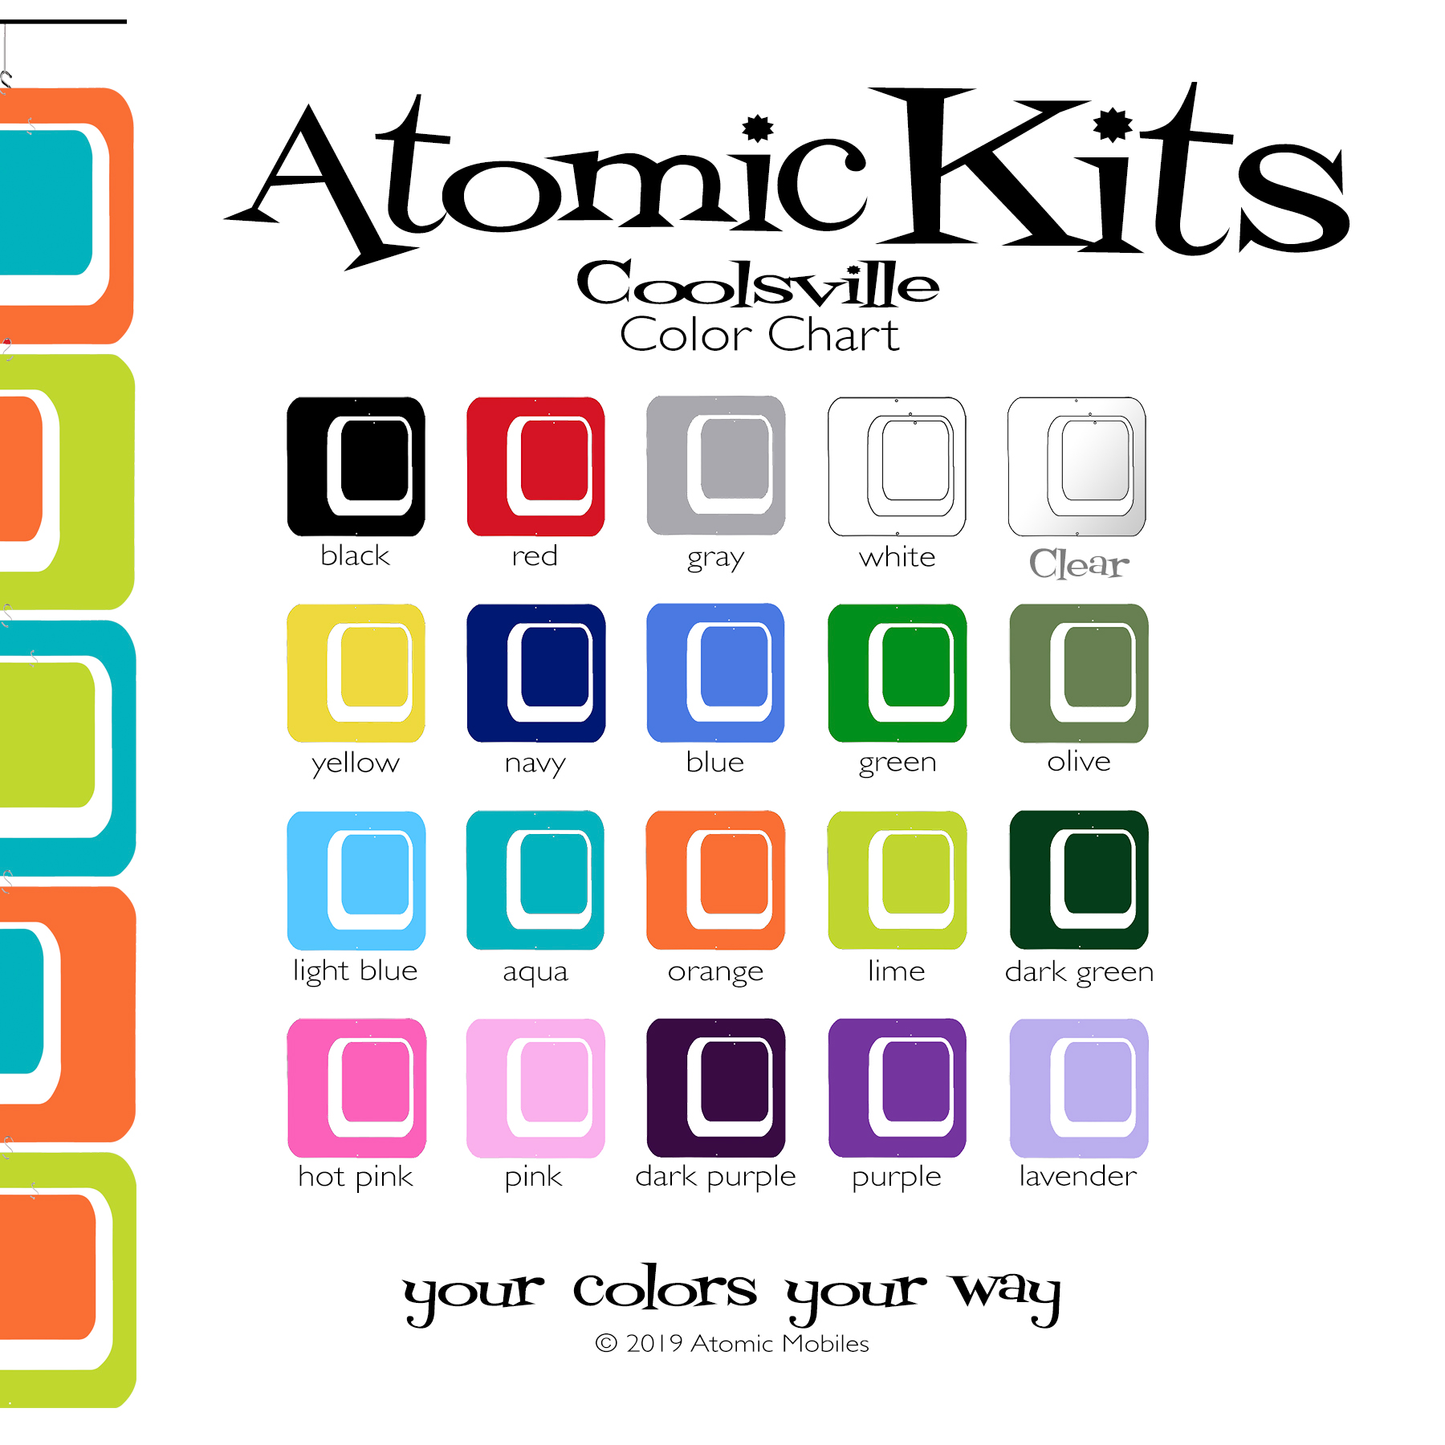 Atomic Kit Color Chart for Coolsville Room Dividers, Partitions, Screens, and mobiles by AtomicMobiles.com